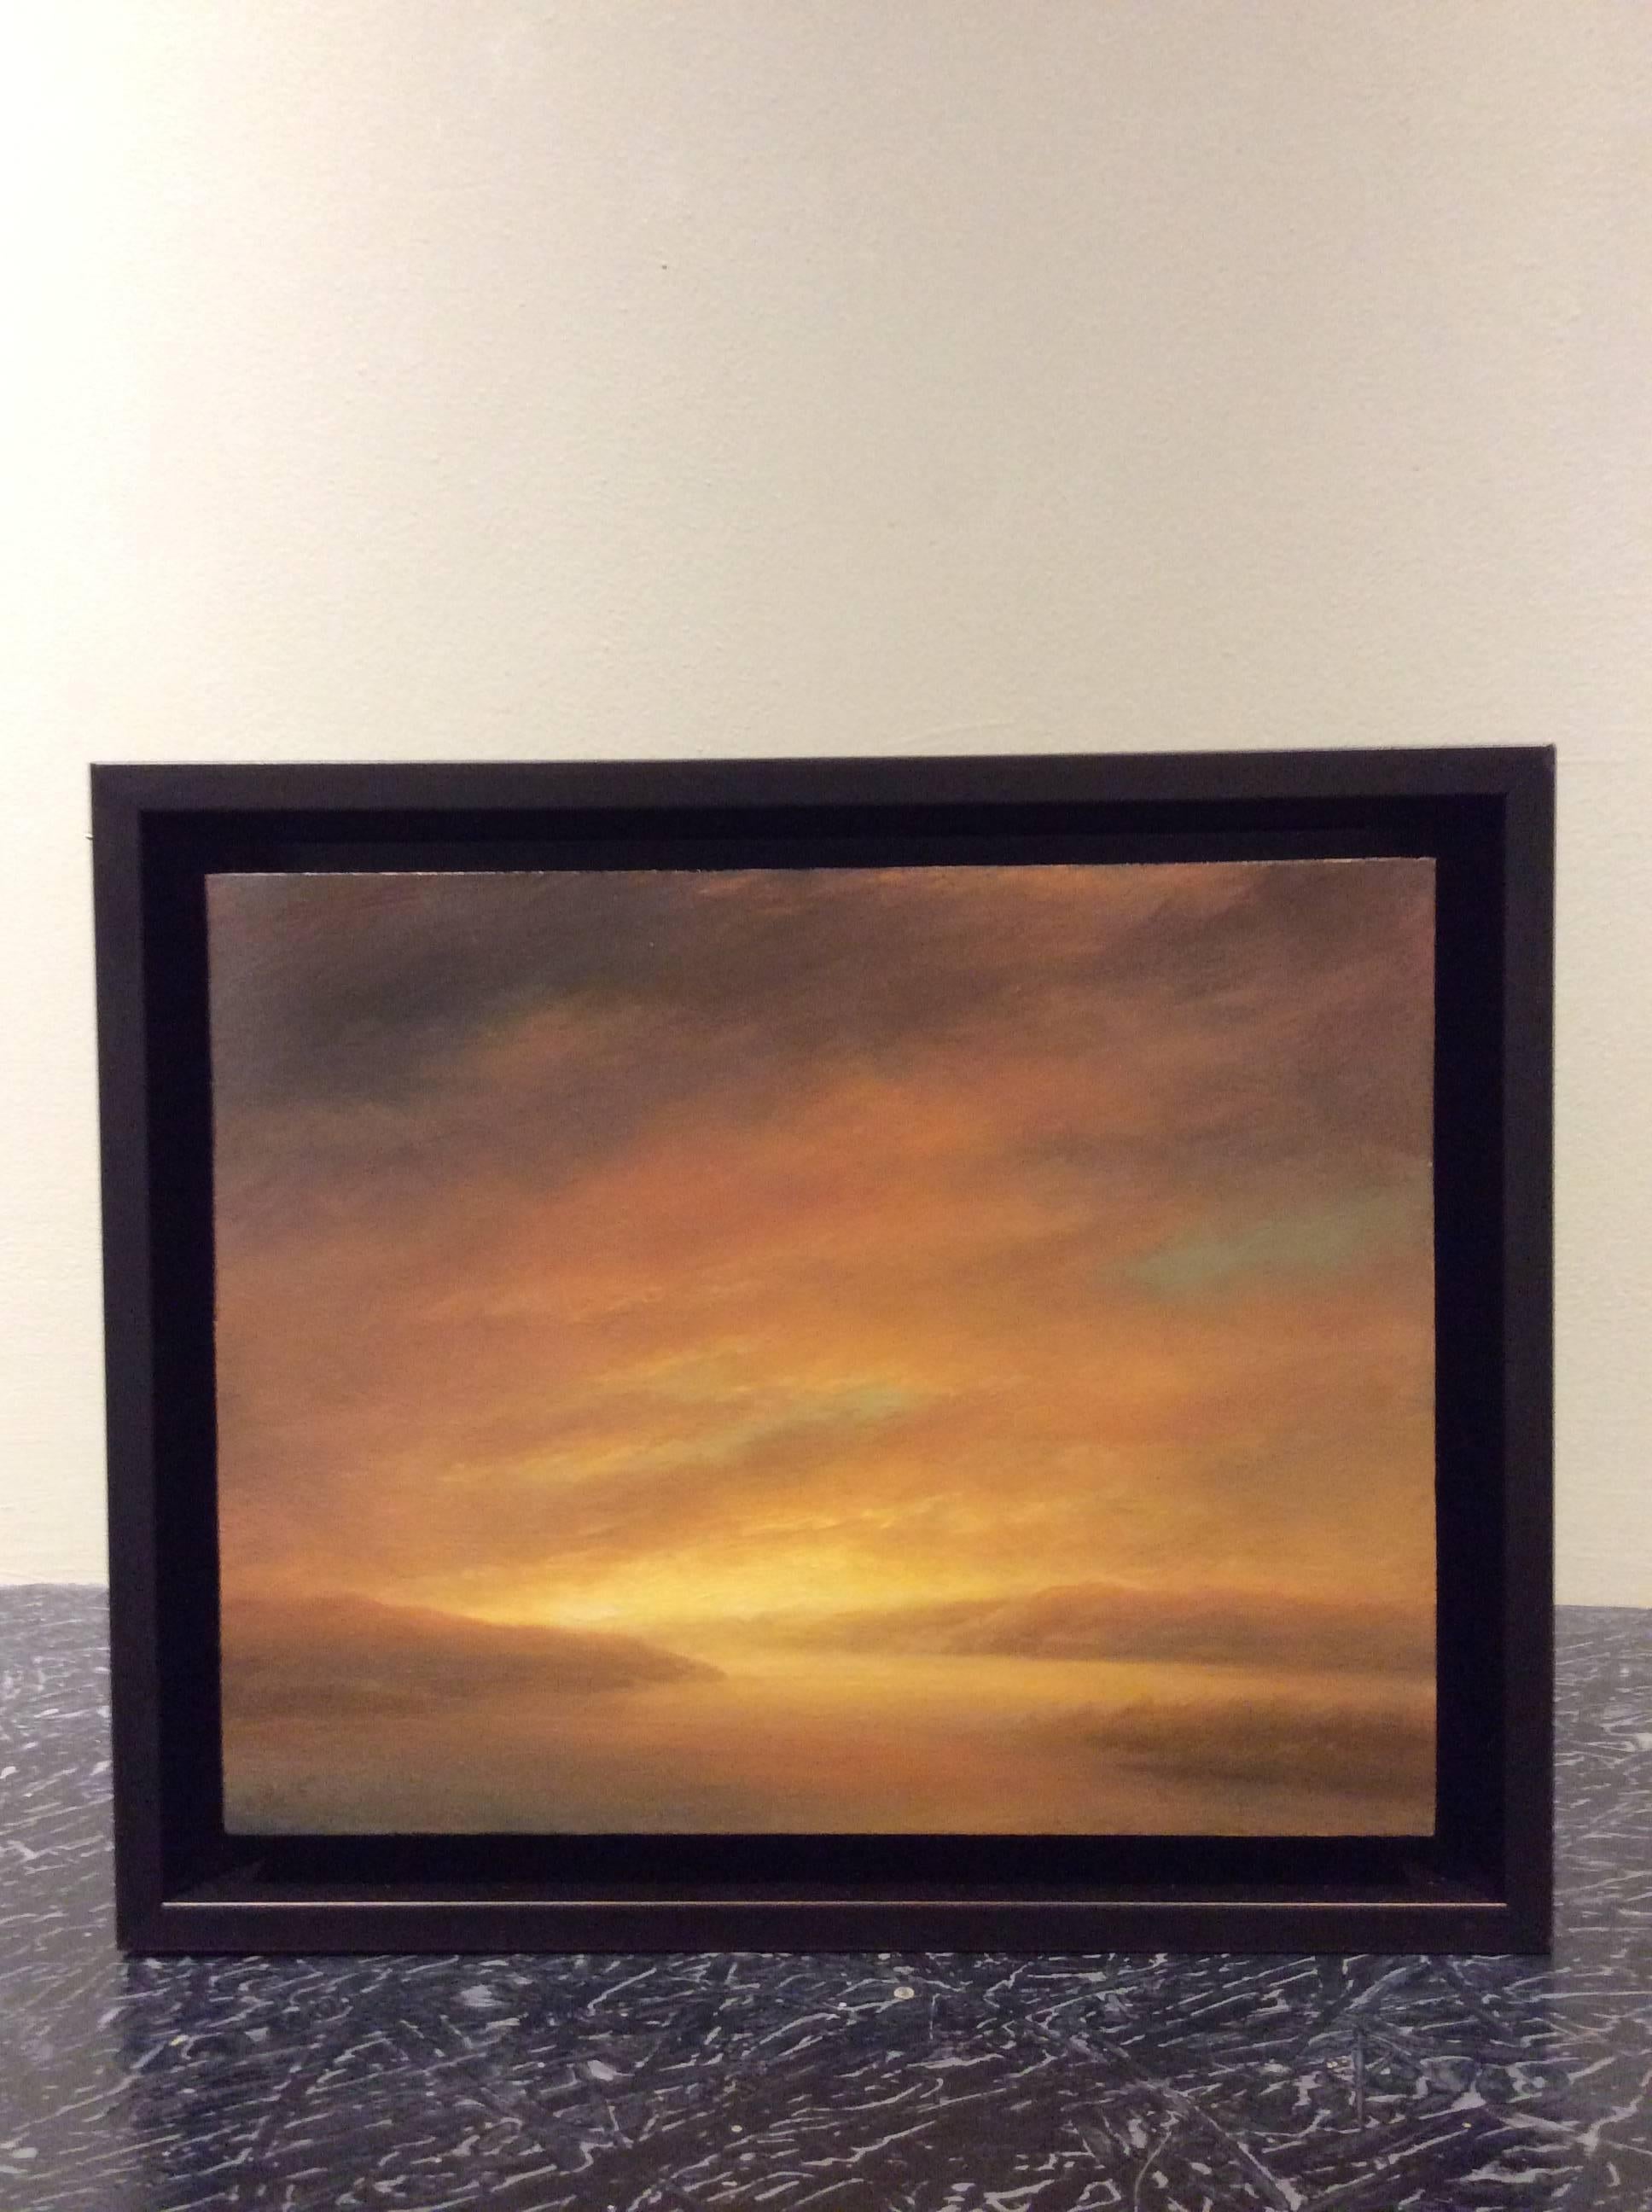 8 x 10 inches, framed
oil on panel

Beautiful small scale landscape oil painting on panel of a bright yellow and orange sunset over the Hudson River in the Hudson River Valley.  Largely influenced by the Hudson River School this landscape oil